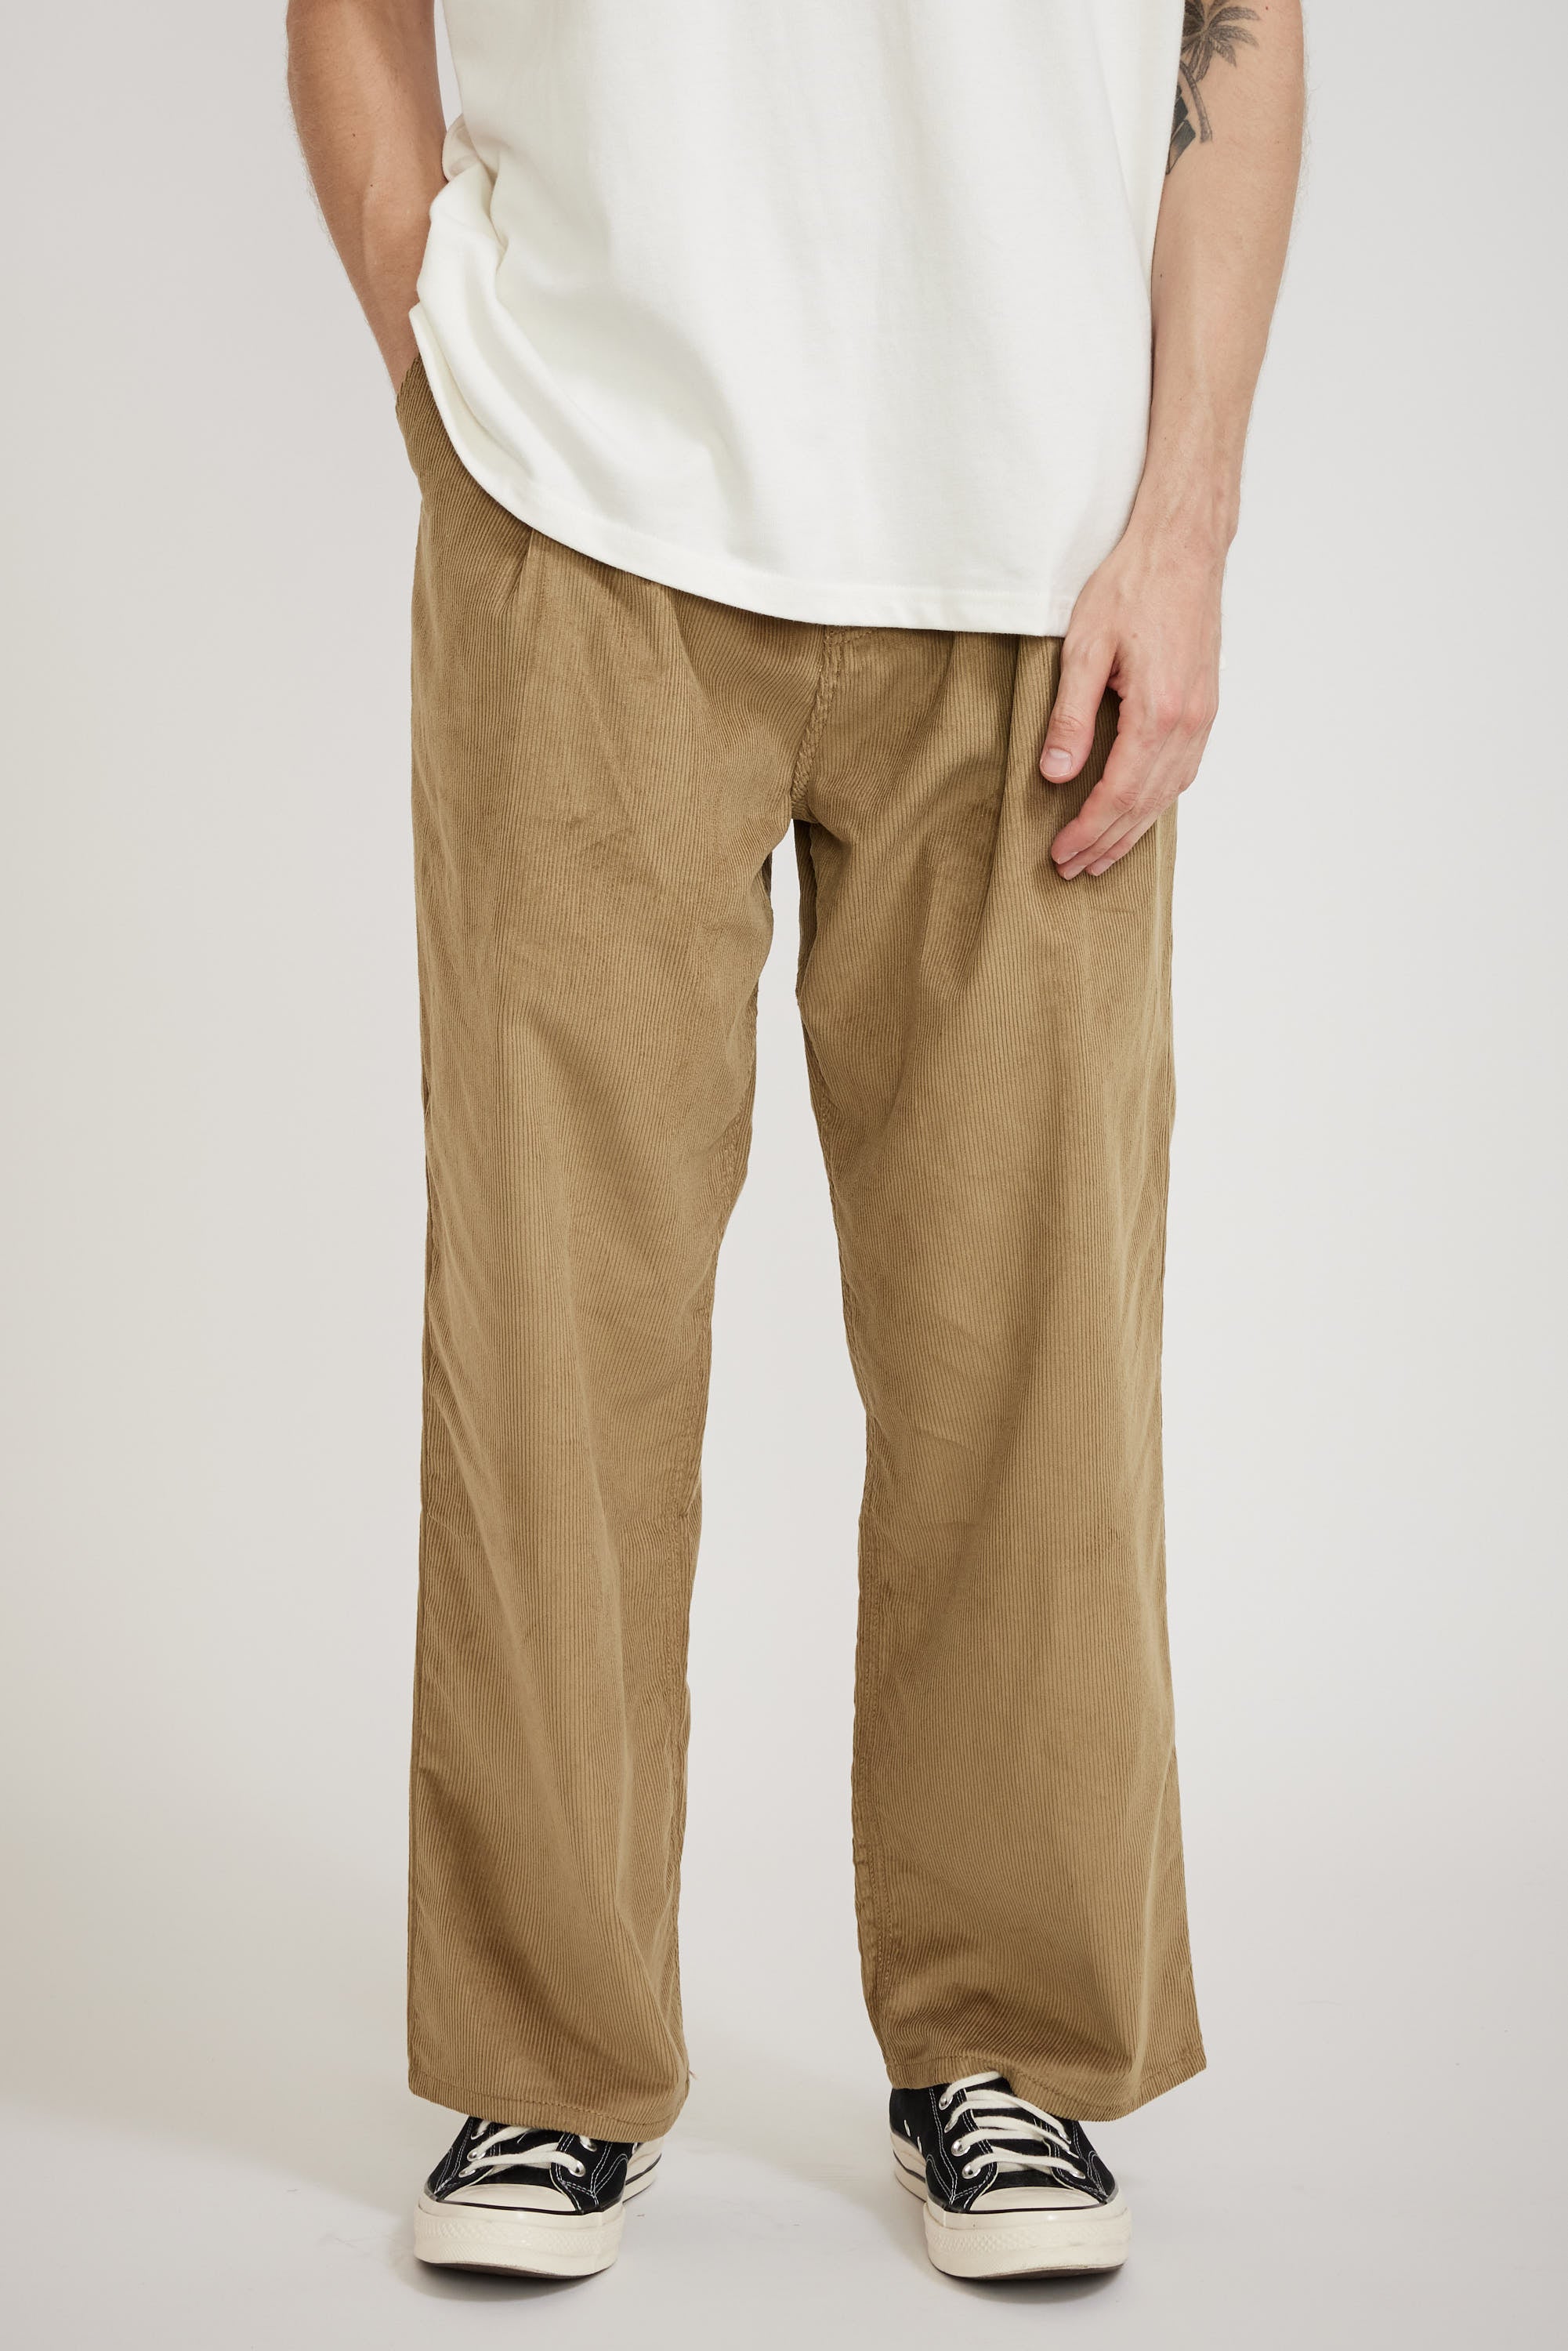 Corduroy Tapered Ankle Pants, UNIQLO US